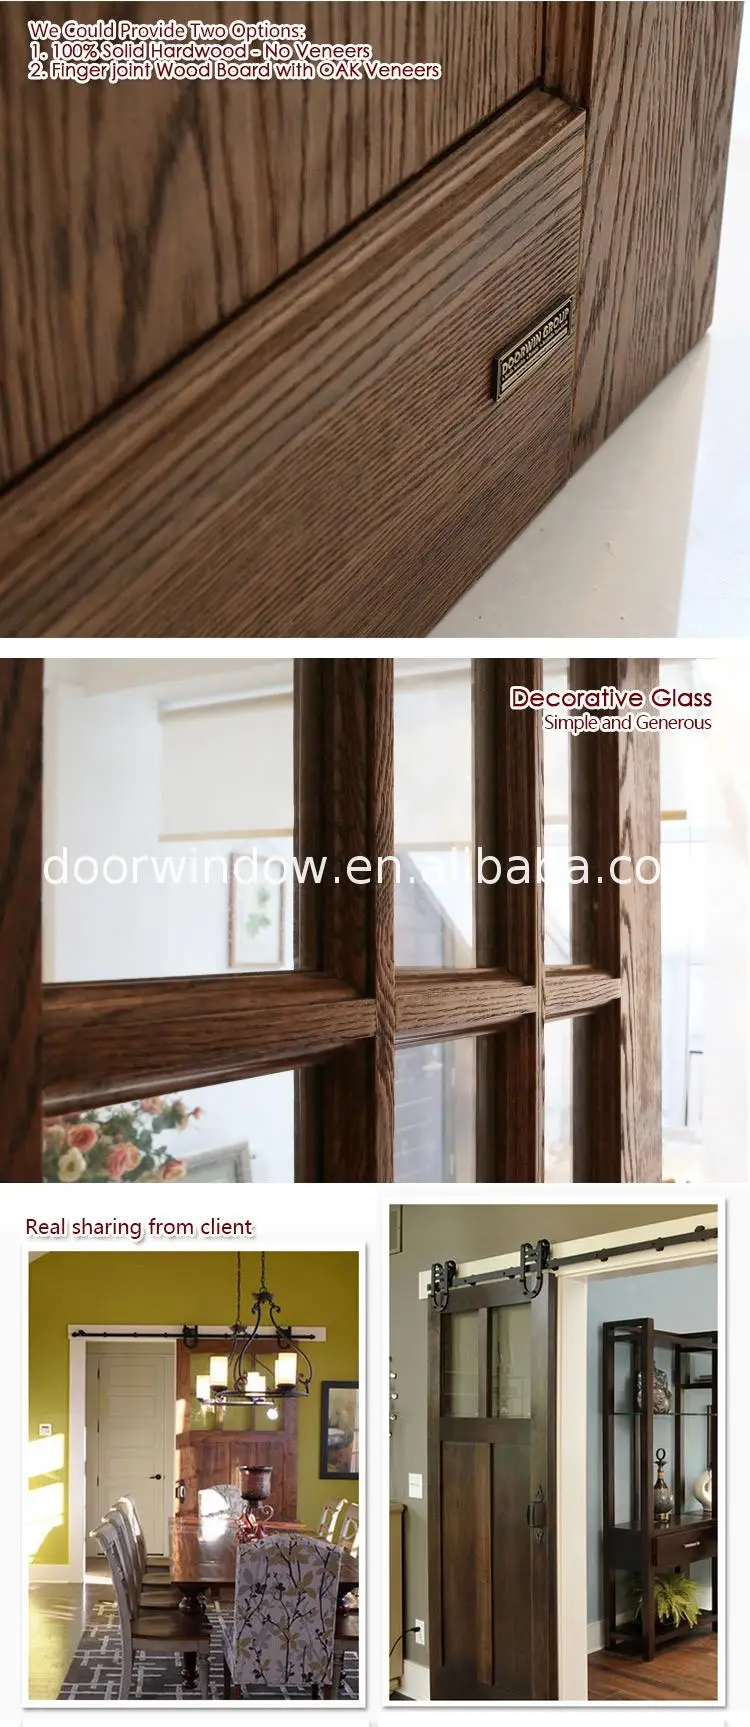 Hot sales interior room doors with glass residential barn pantry